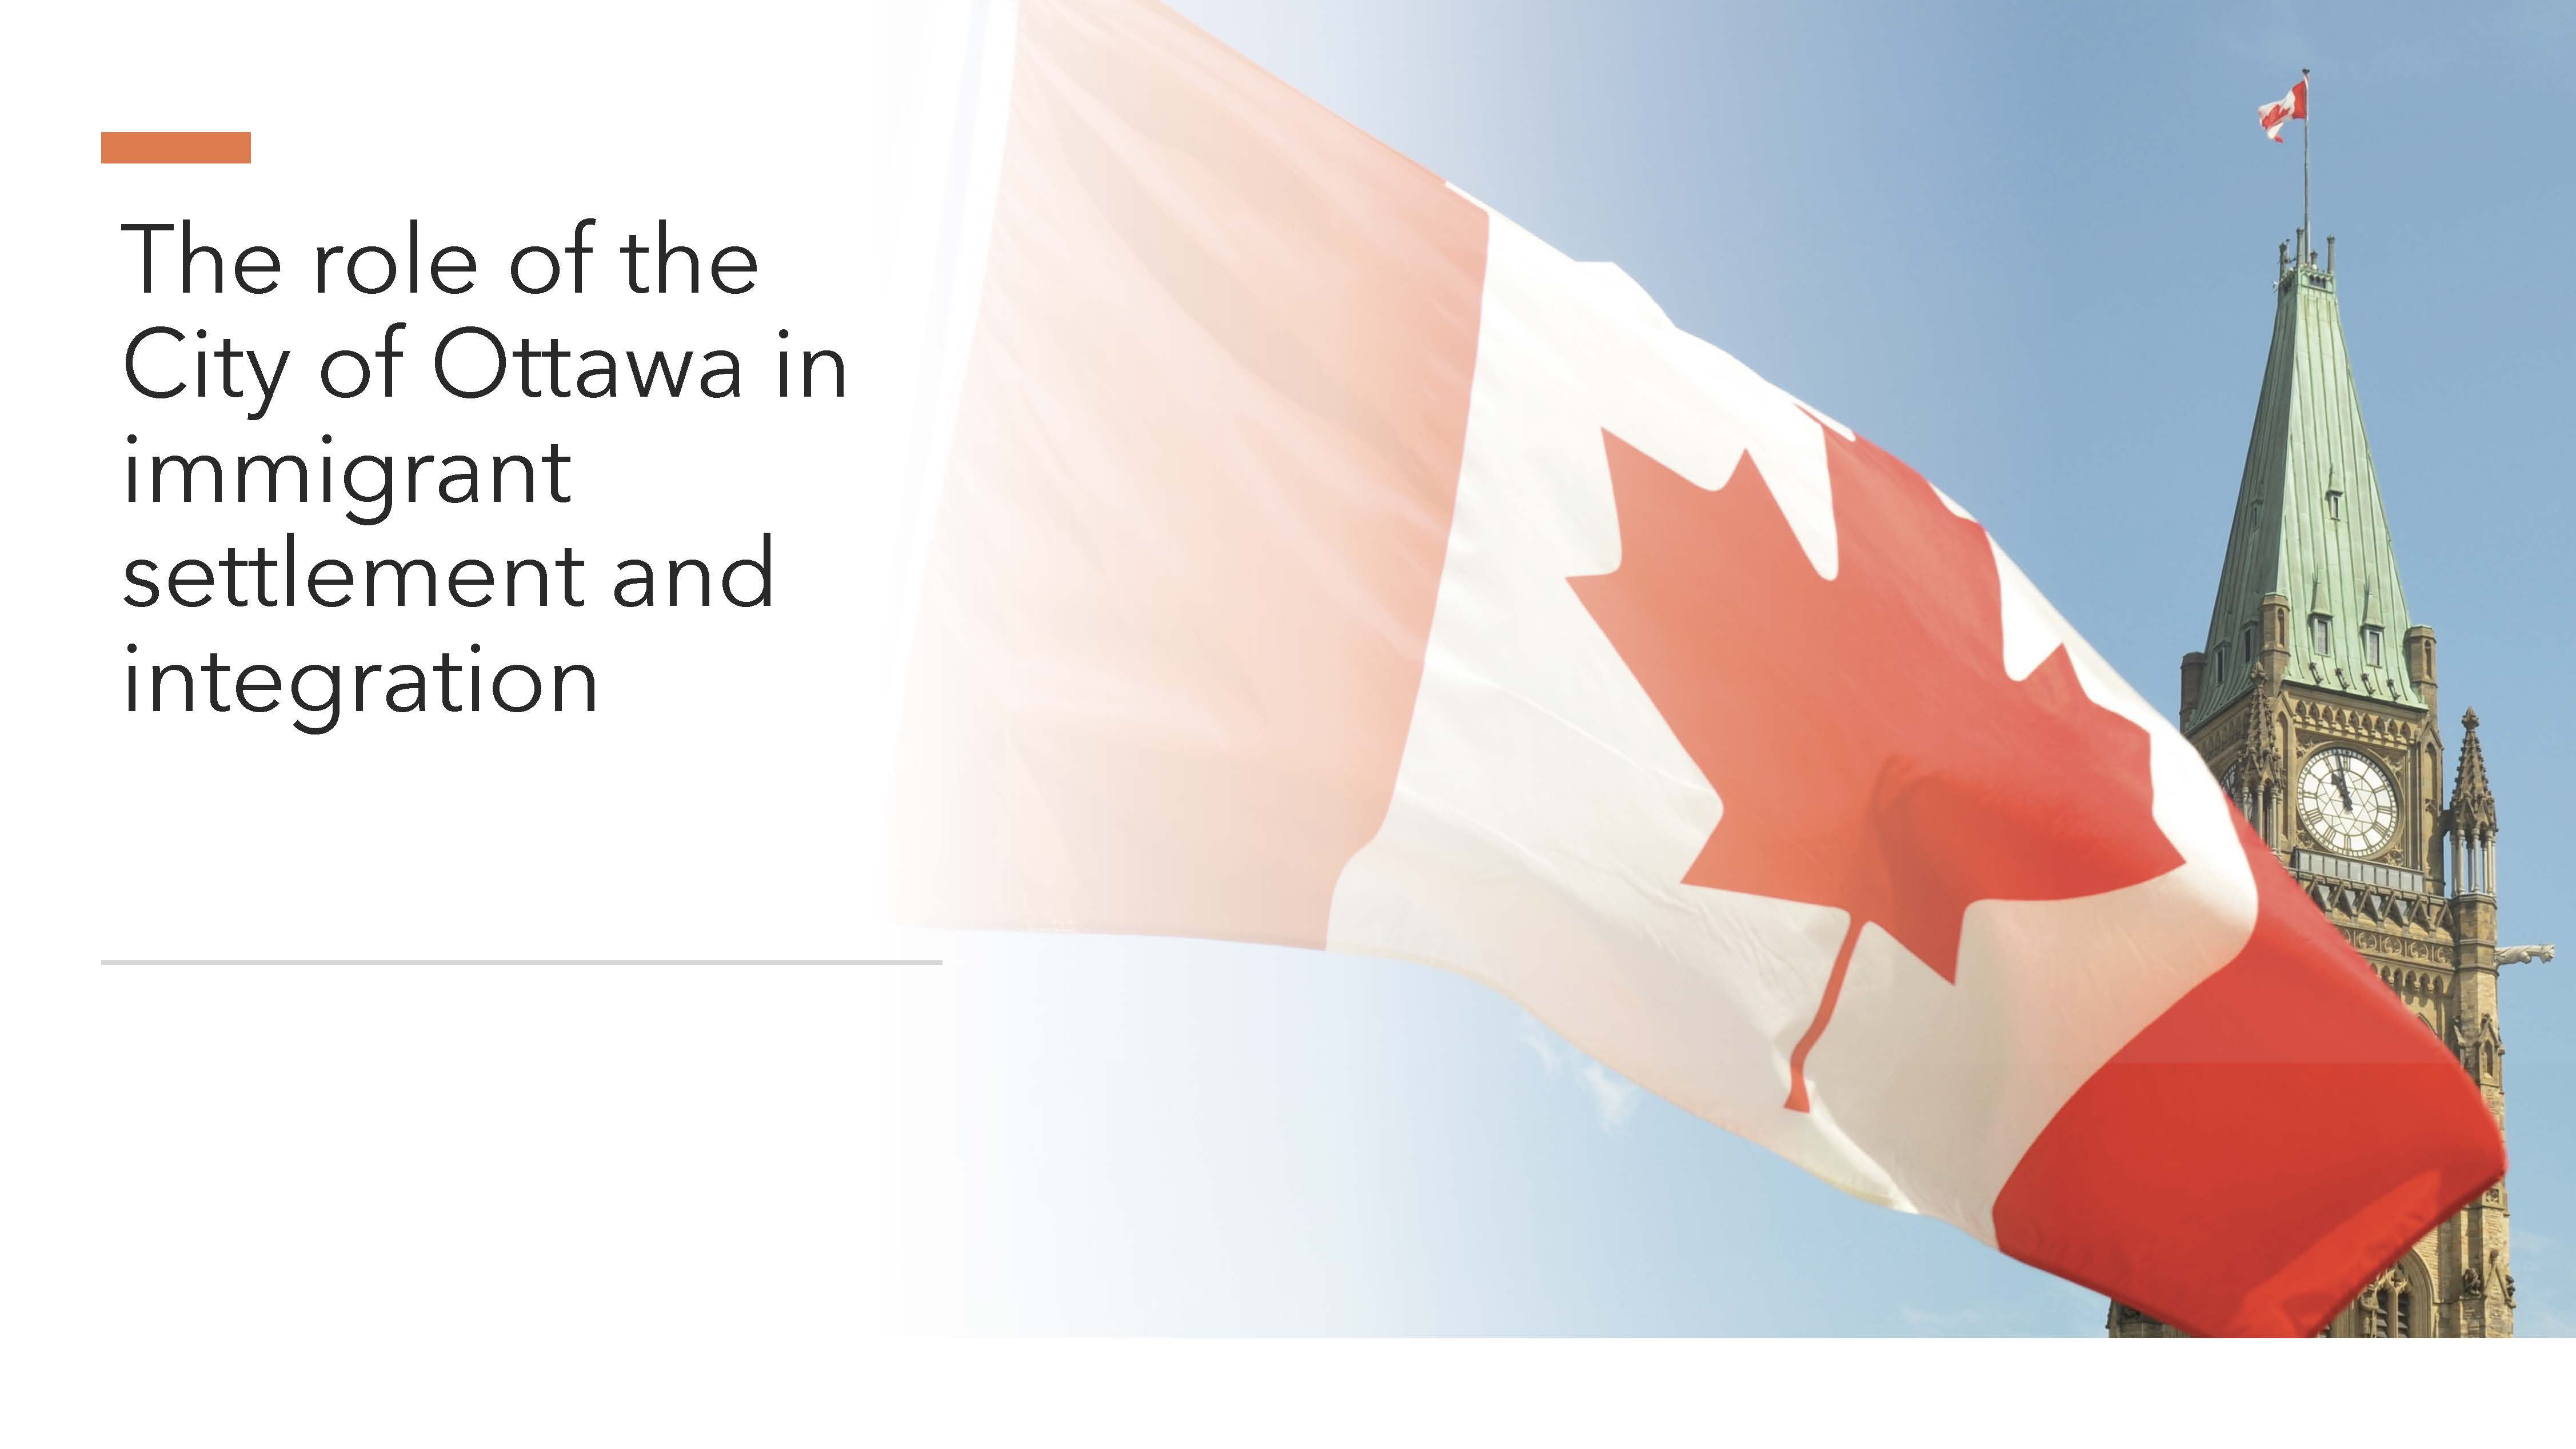 New Report: The role of the City of Ottawa in immigrant settlement and integration